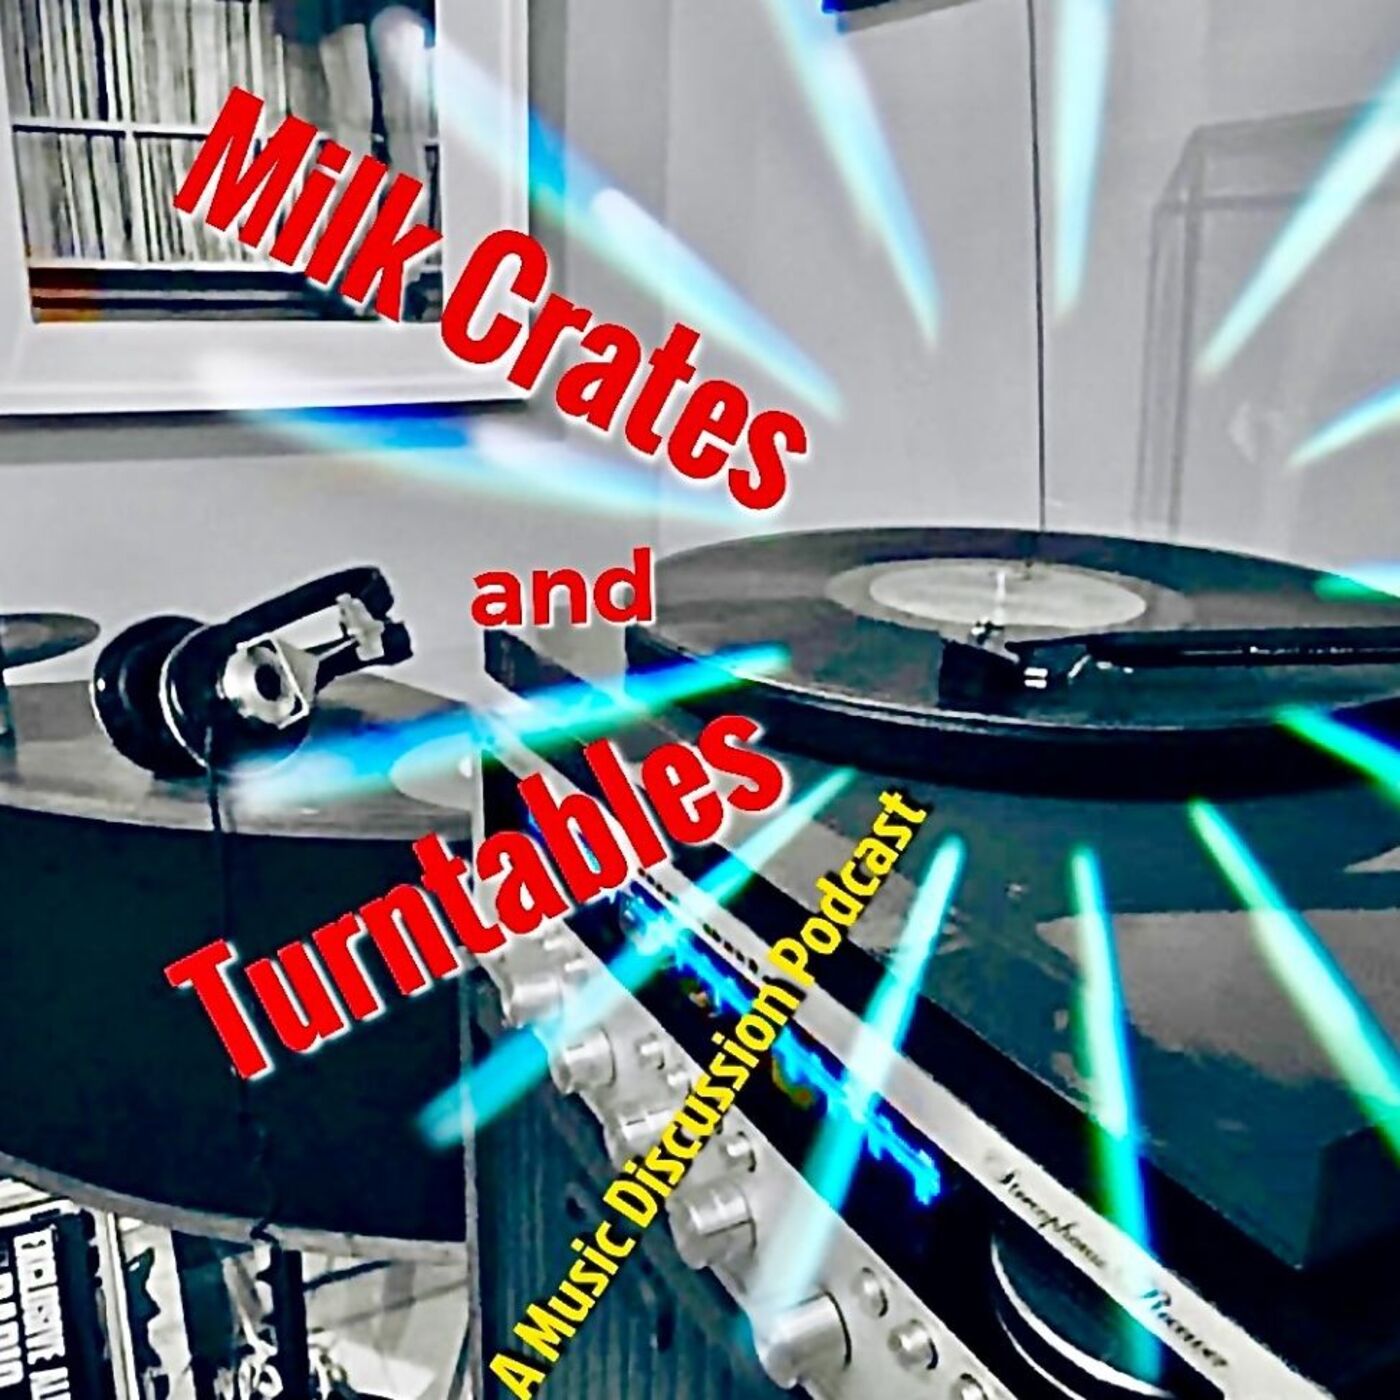 Fresh update on "rodney dangerfield" discussed on Milk Crates and Turntables. A Music Discussion Podcast